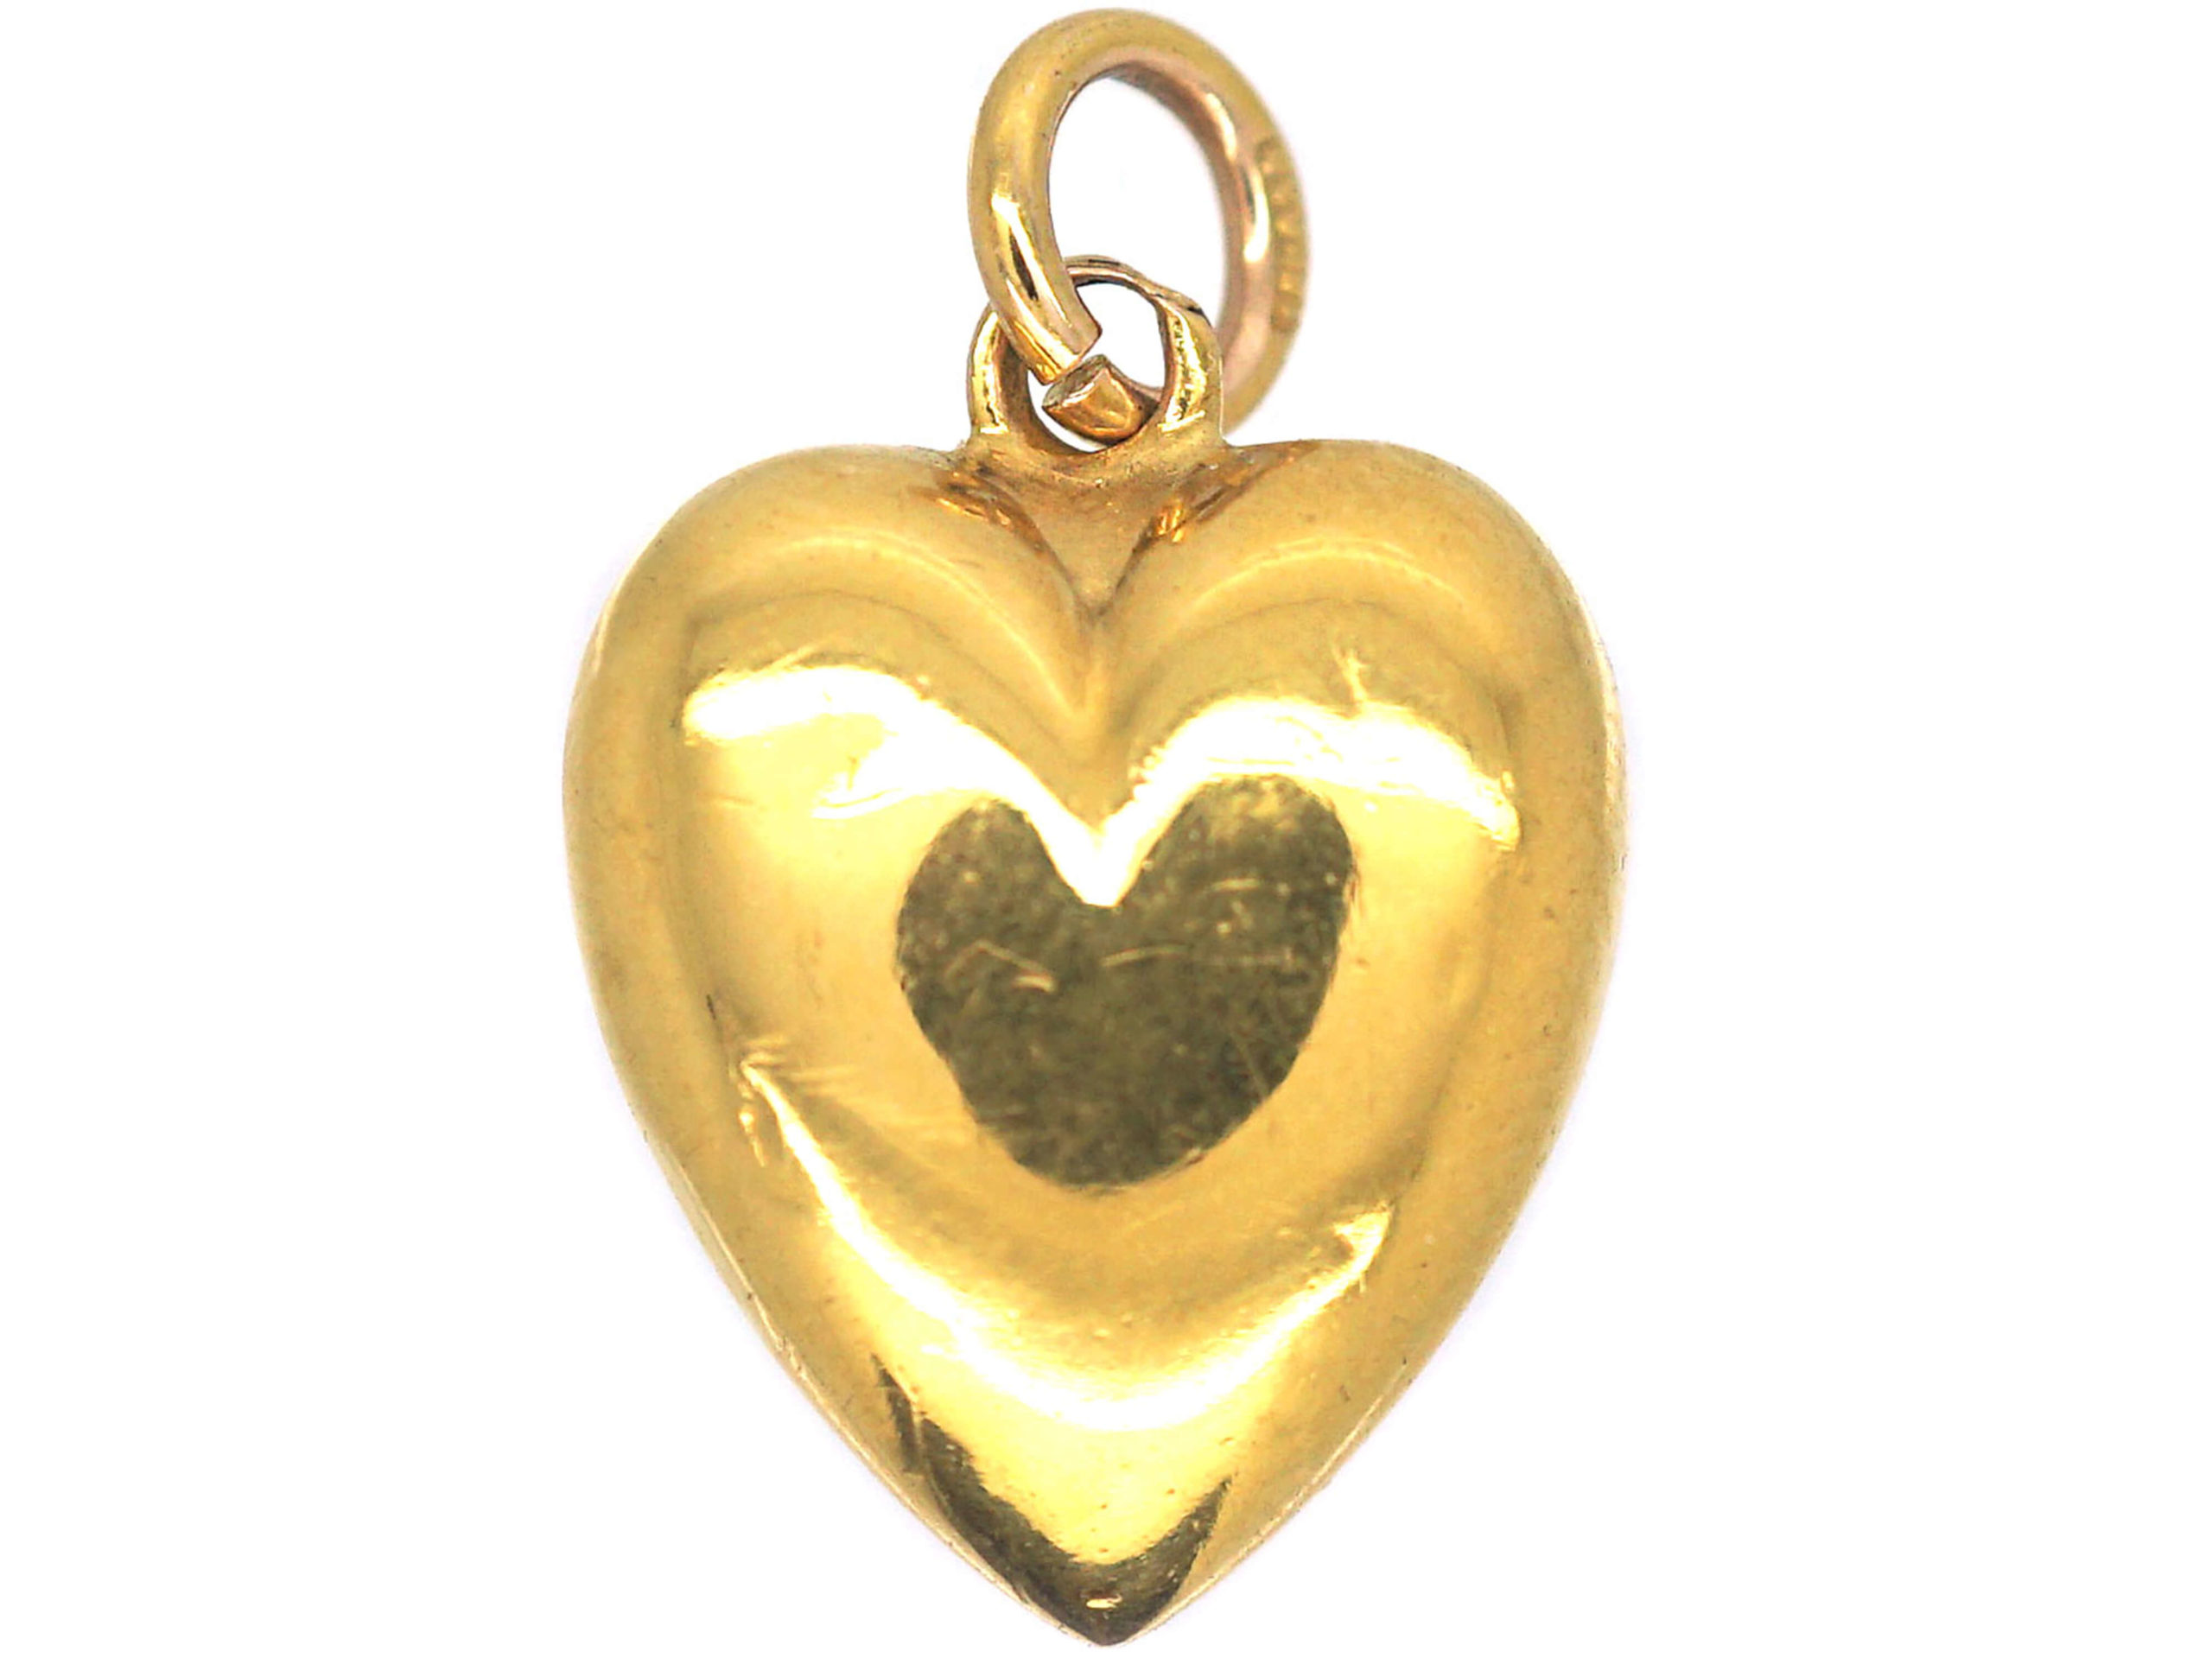 Edwardian 15ct Gold Heart Pendant (396/O) | The Antique Jewellery Company